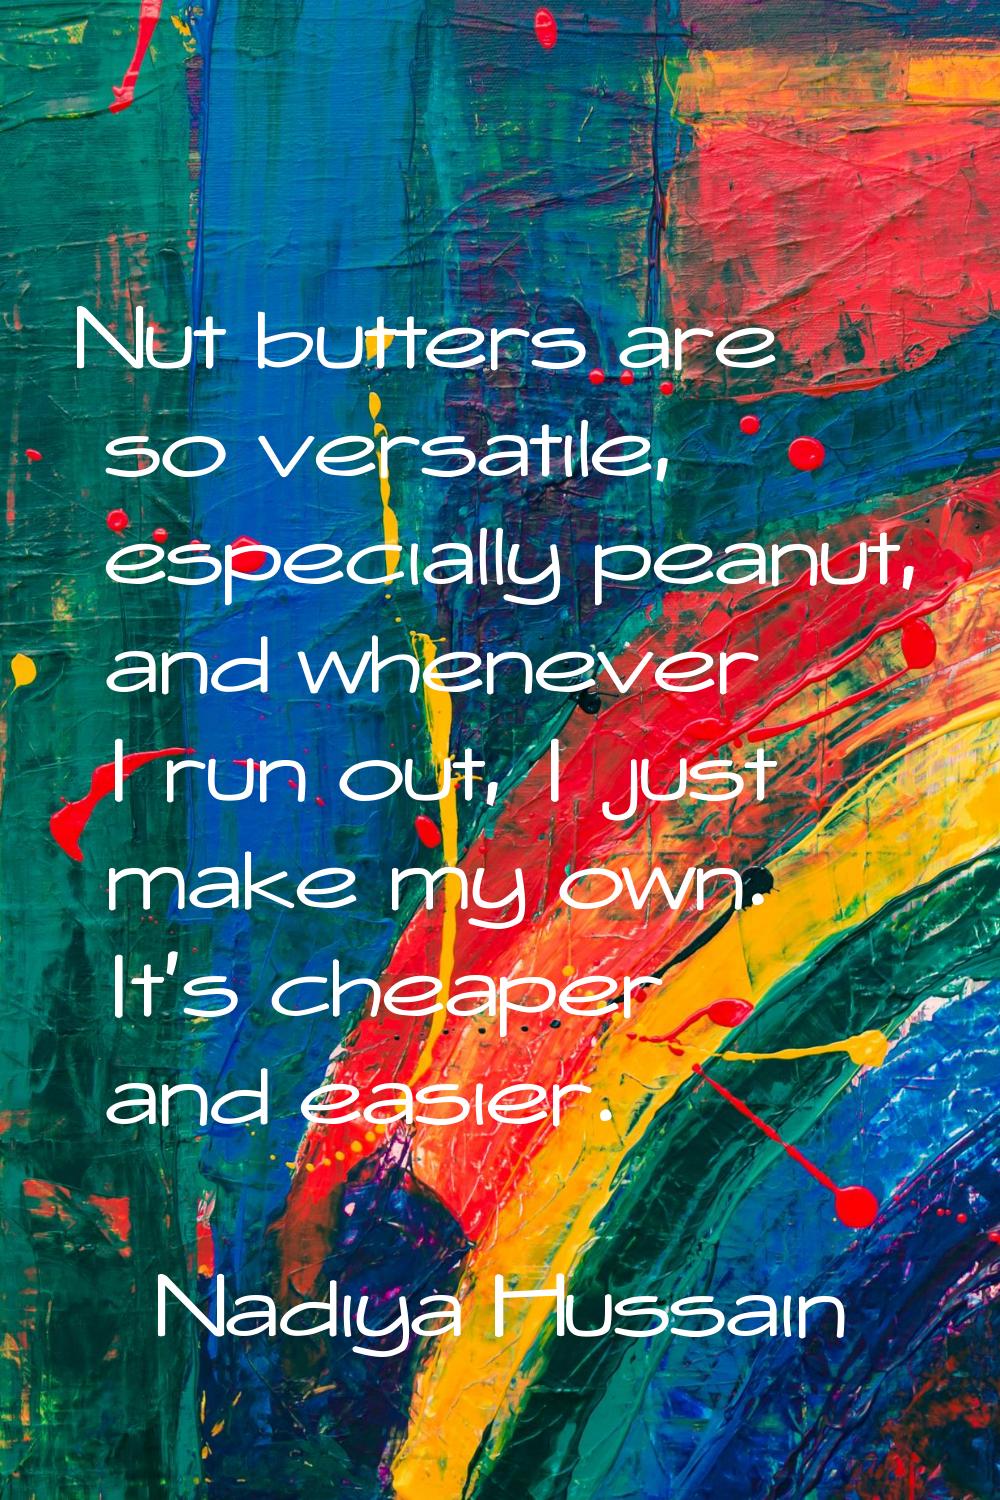 Nut butters are so versatile, especially peanut, and whenever I run out, I just make my own. It’s c